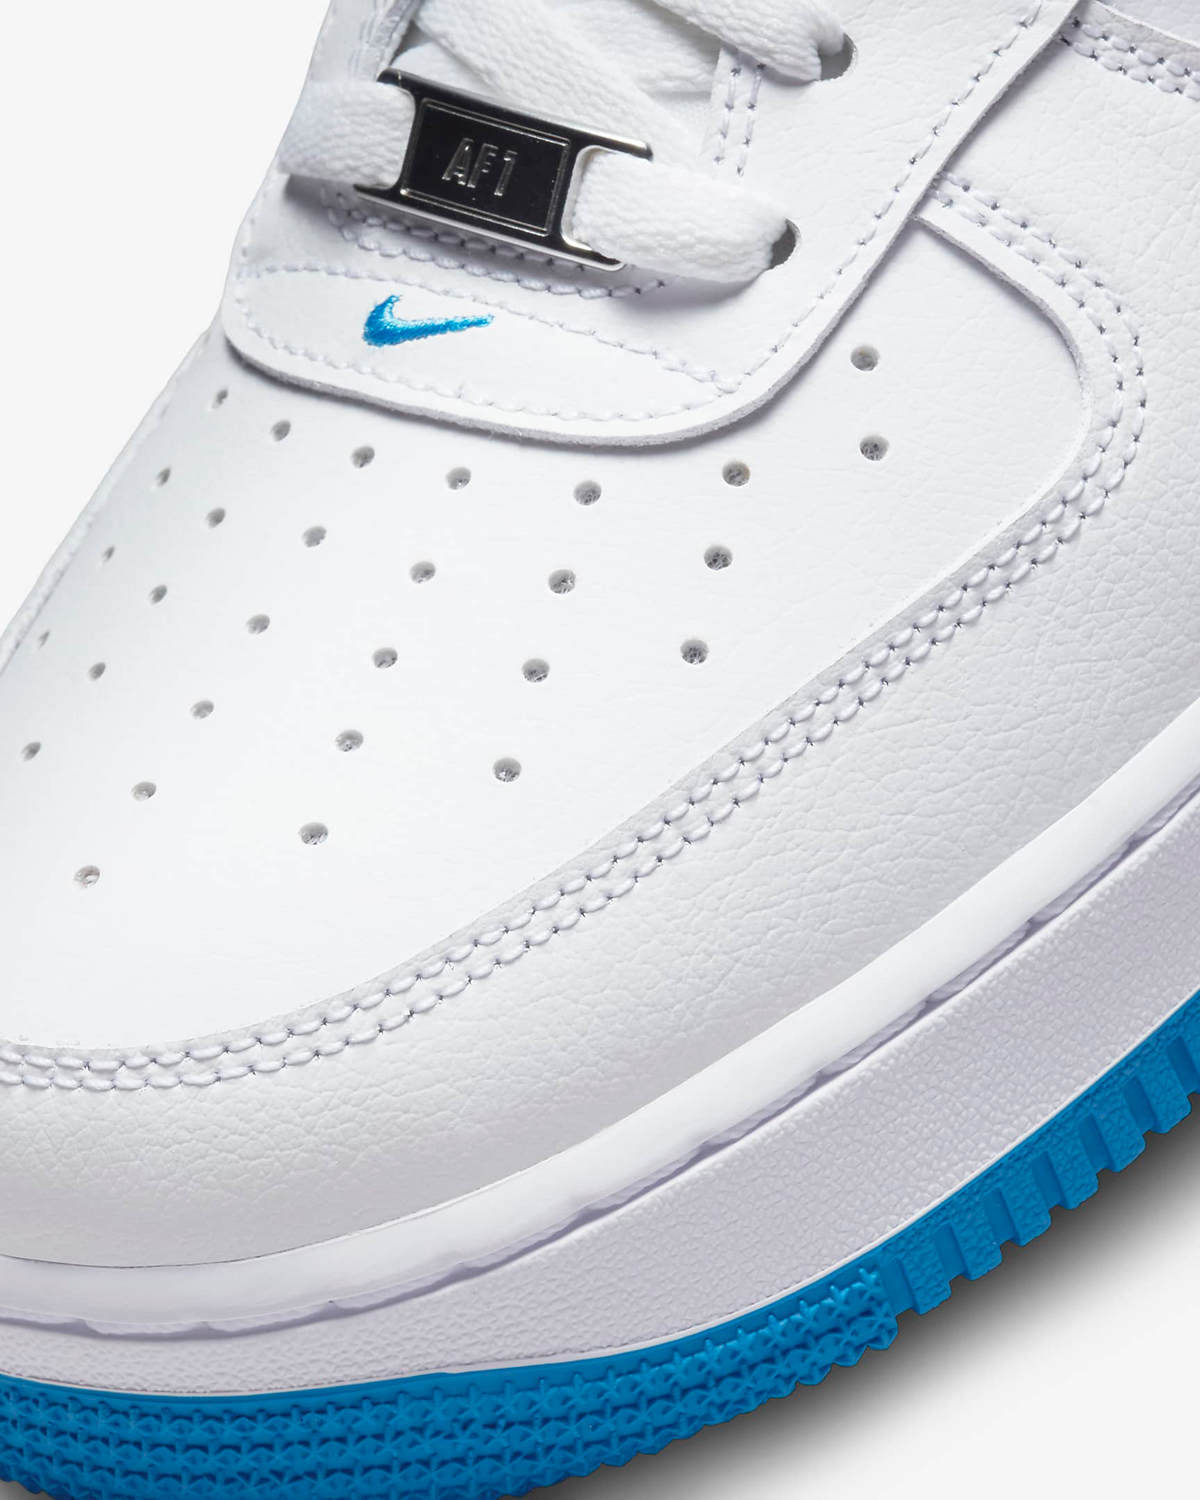 nike-air-force-1-low-white-light-photo-blue-7